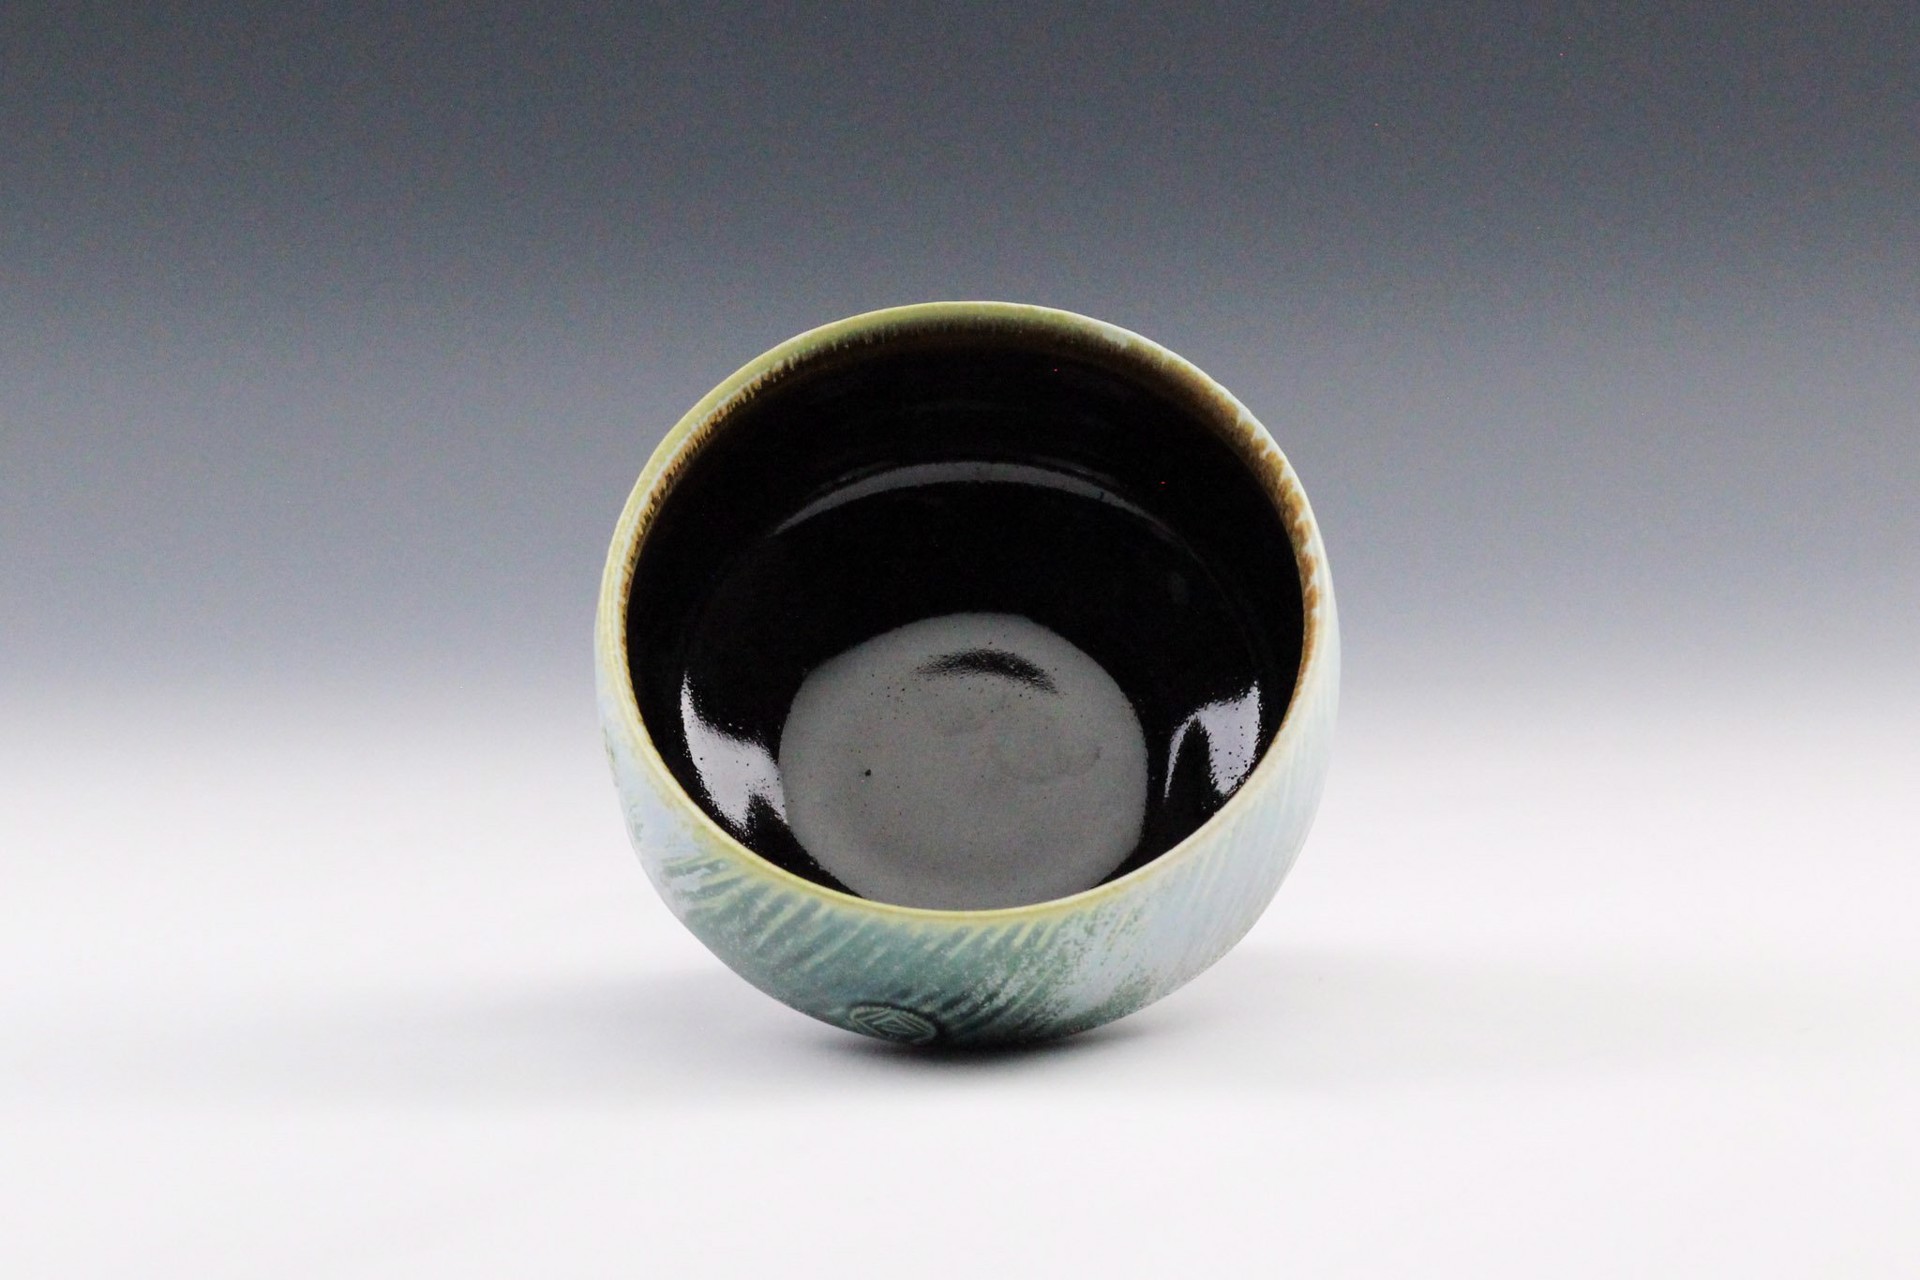 Small Bowl by Nick DeVries